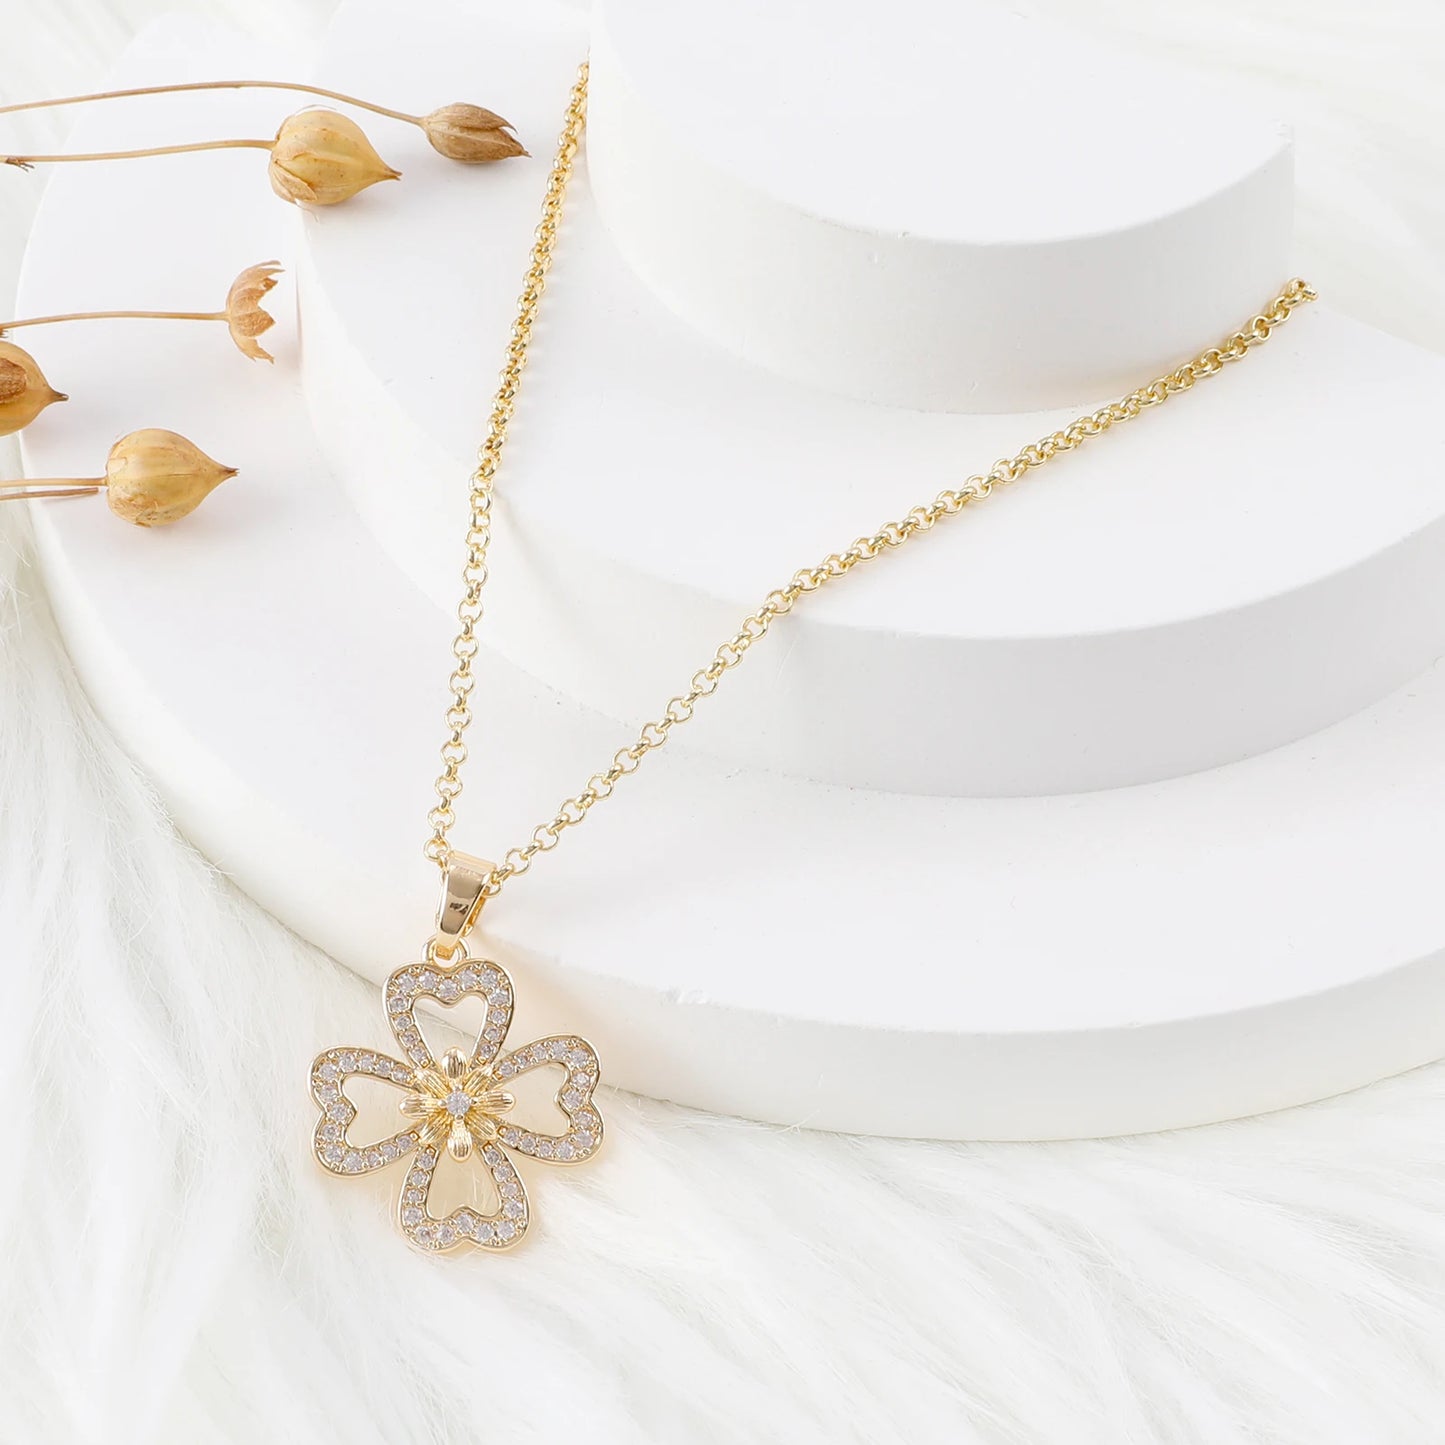 Lucky Four Leaf Clover Pendant Necklace - Luxury Fashion Jewelry for Women and Girls - The Clover Collection by IceBox DC